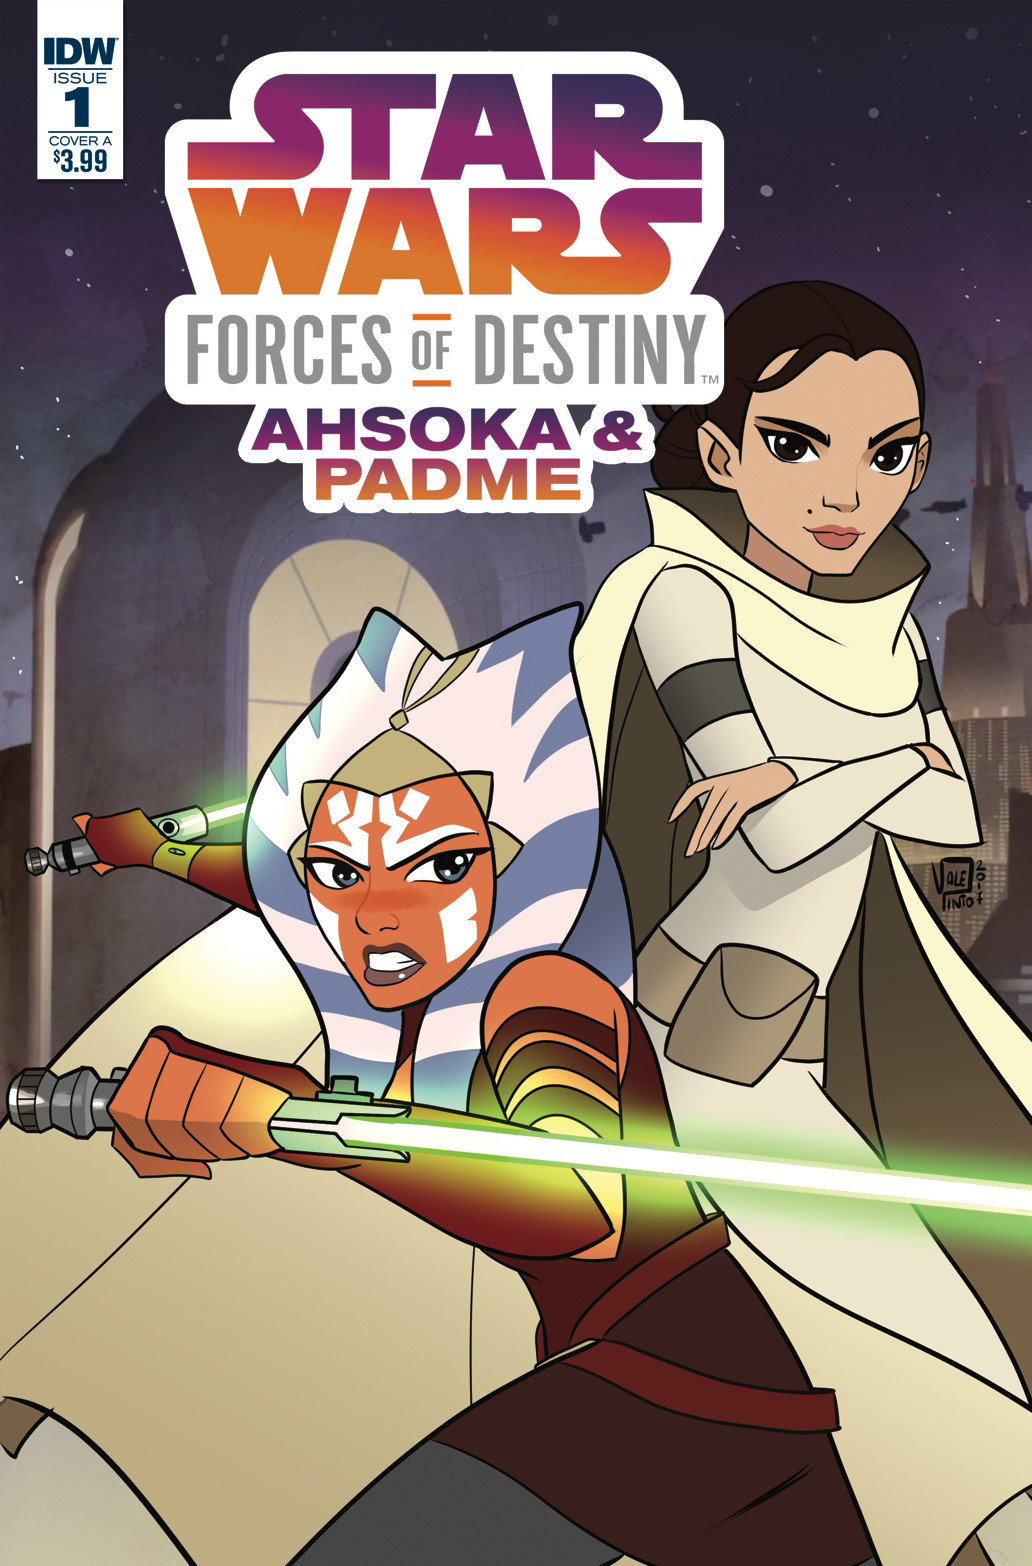 Star Wars: Forces of Destiny Ahsoka and Padme no. 1 (2018 Series)